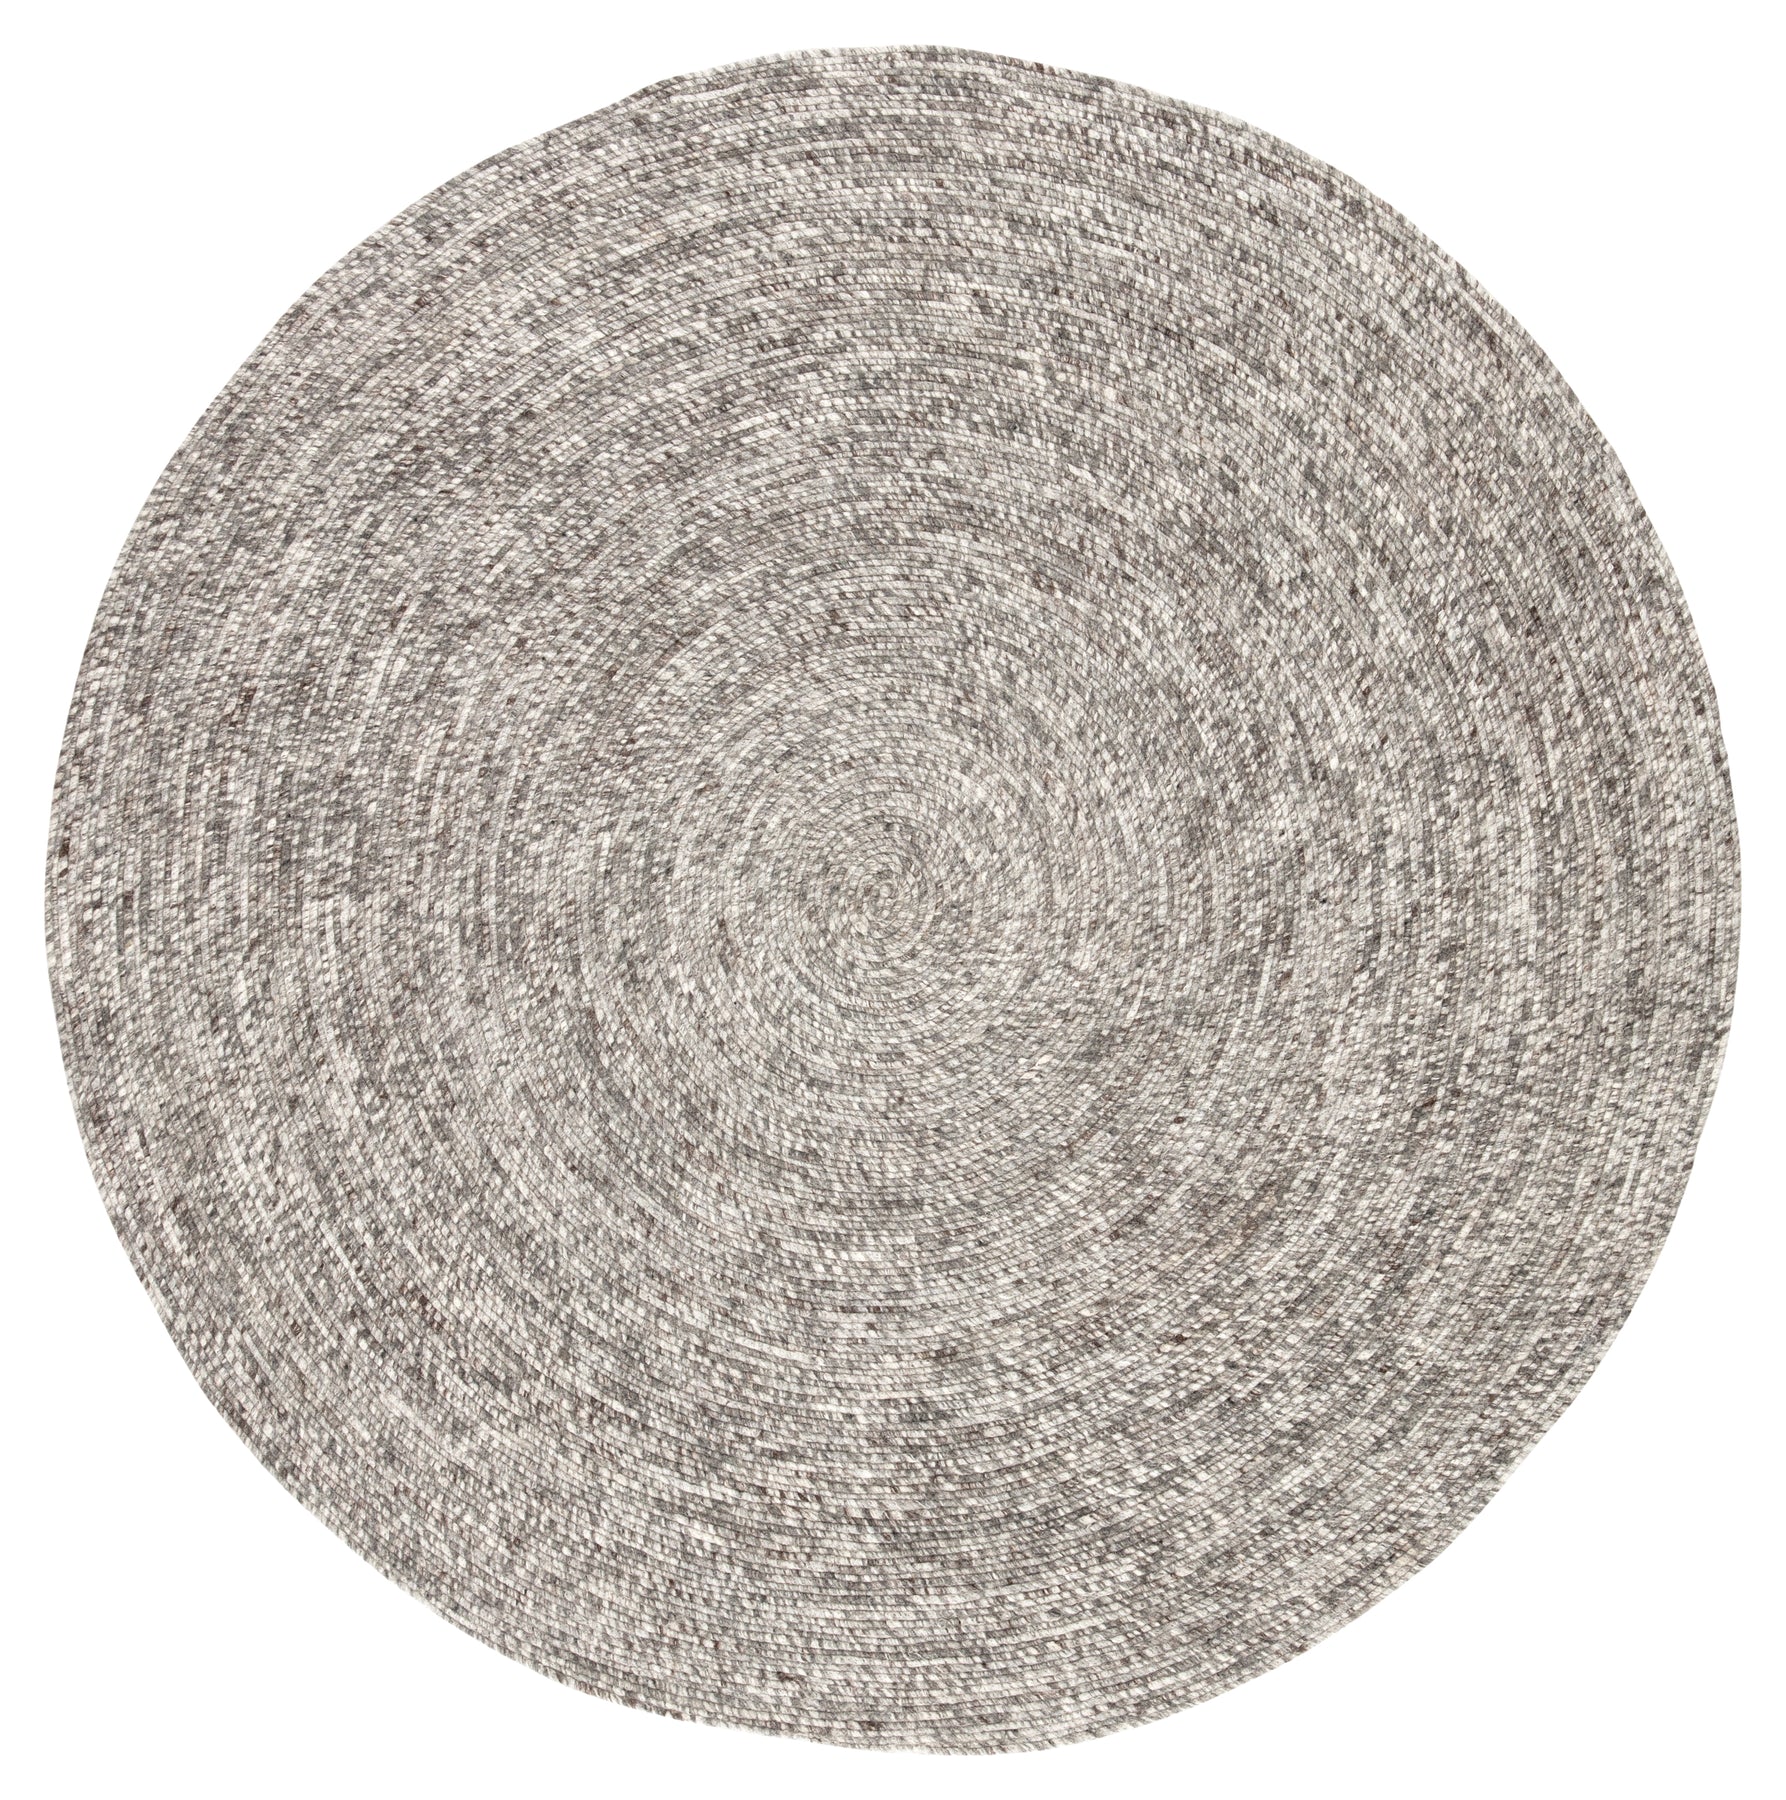 Shop Tenby Natural Solid Gray & White Area Rug | Burke Decor